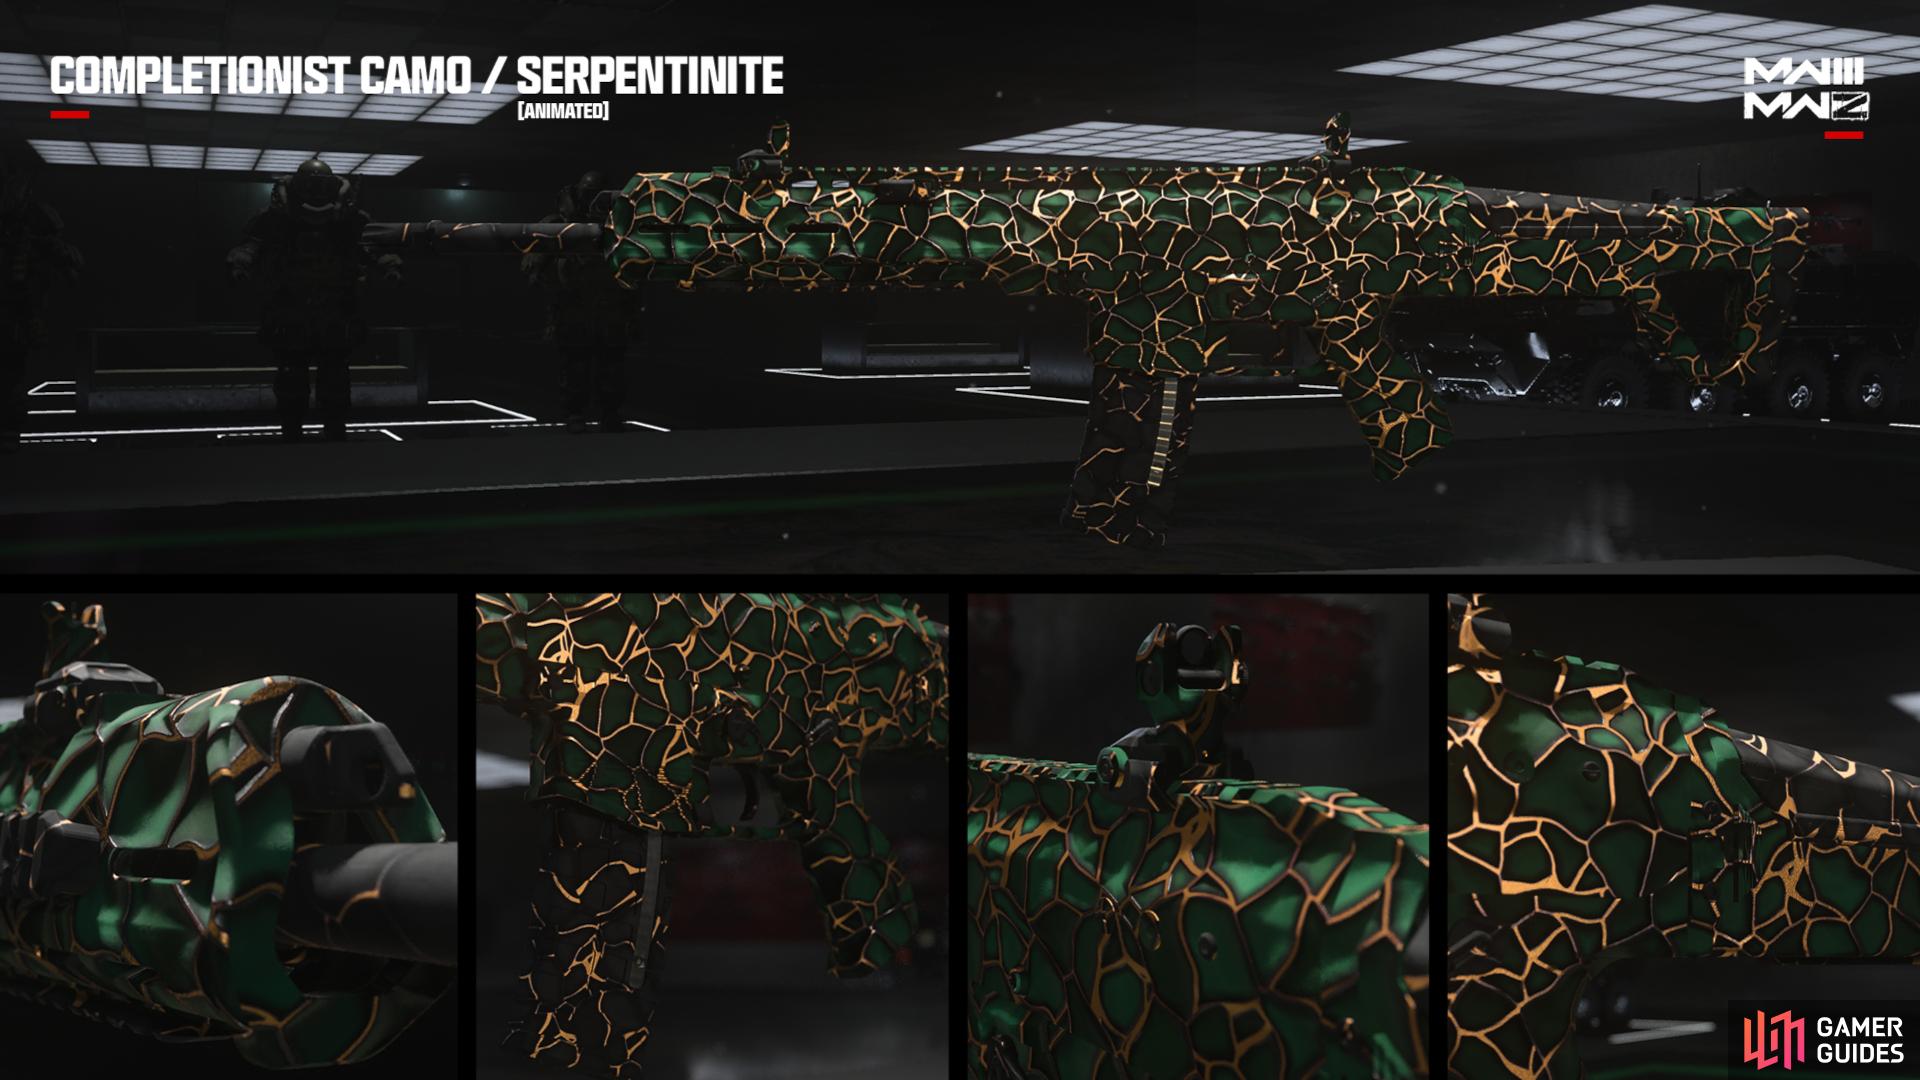 A guide on how to get Serpentine Camo in MW3, featuring tips and tricks to get there, Image via Activision.